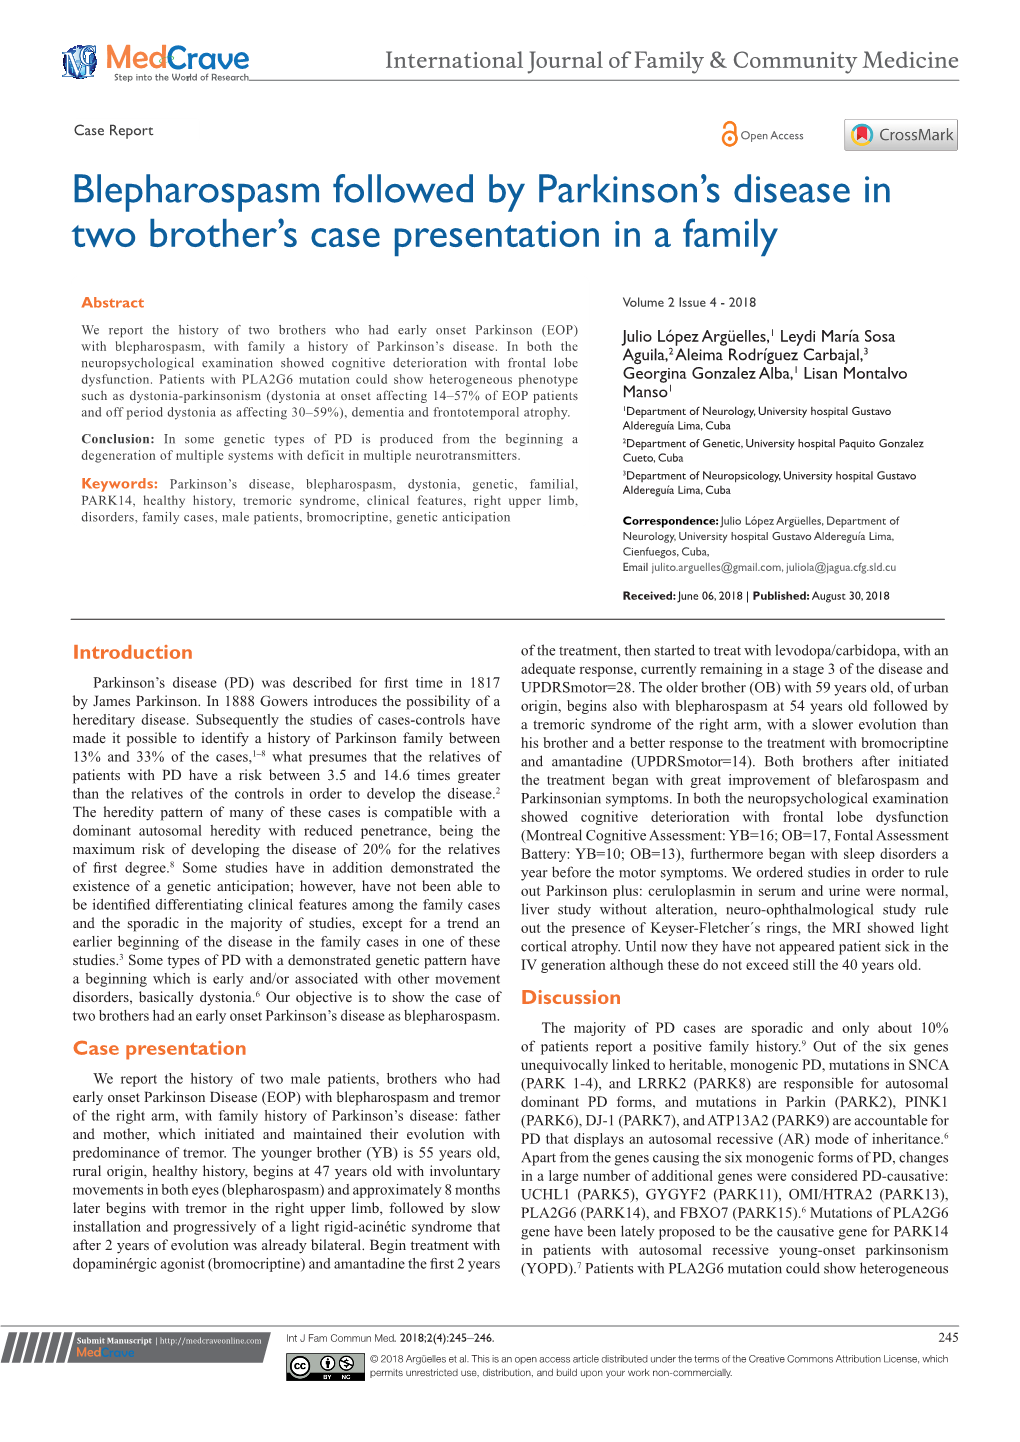 Blepharospasm Followed by Parkinson's Disease in Two Brother's Case Presentation in a Family